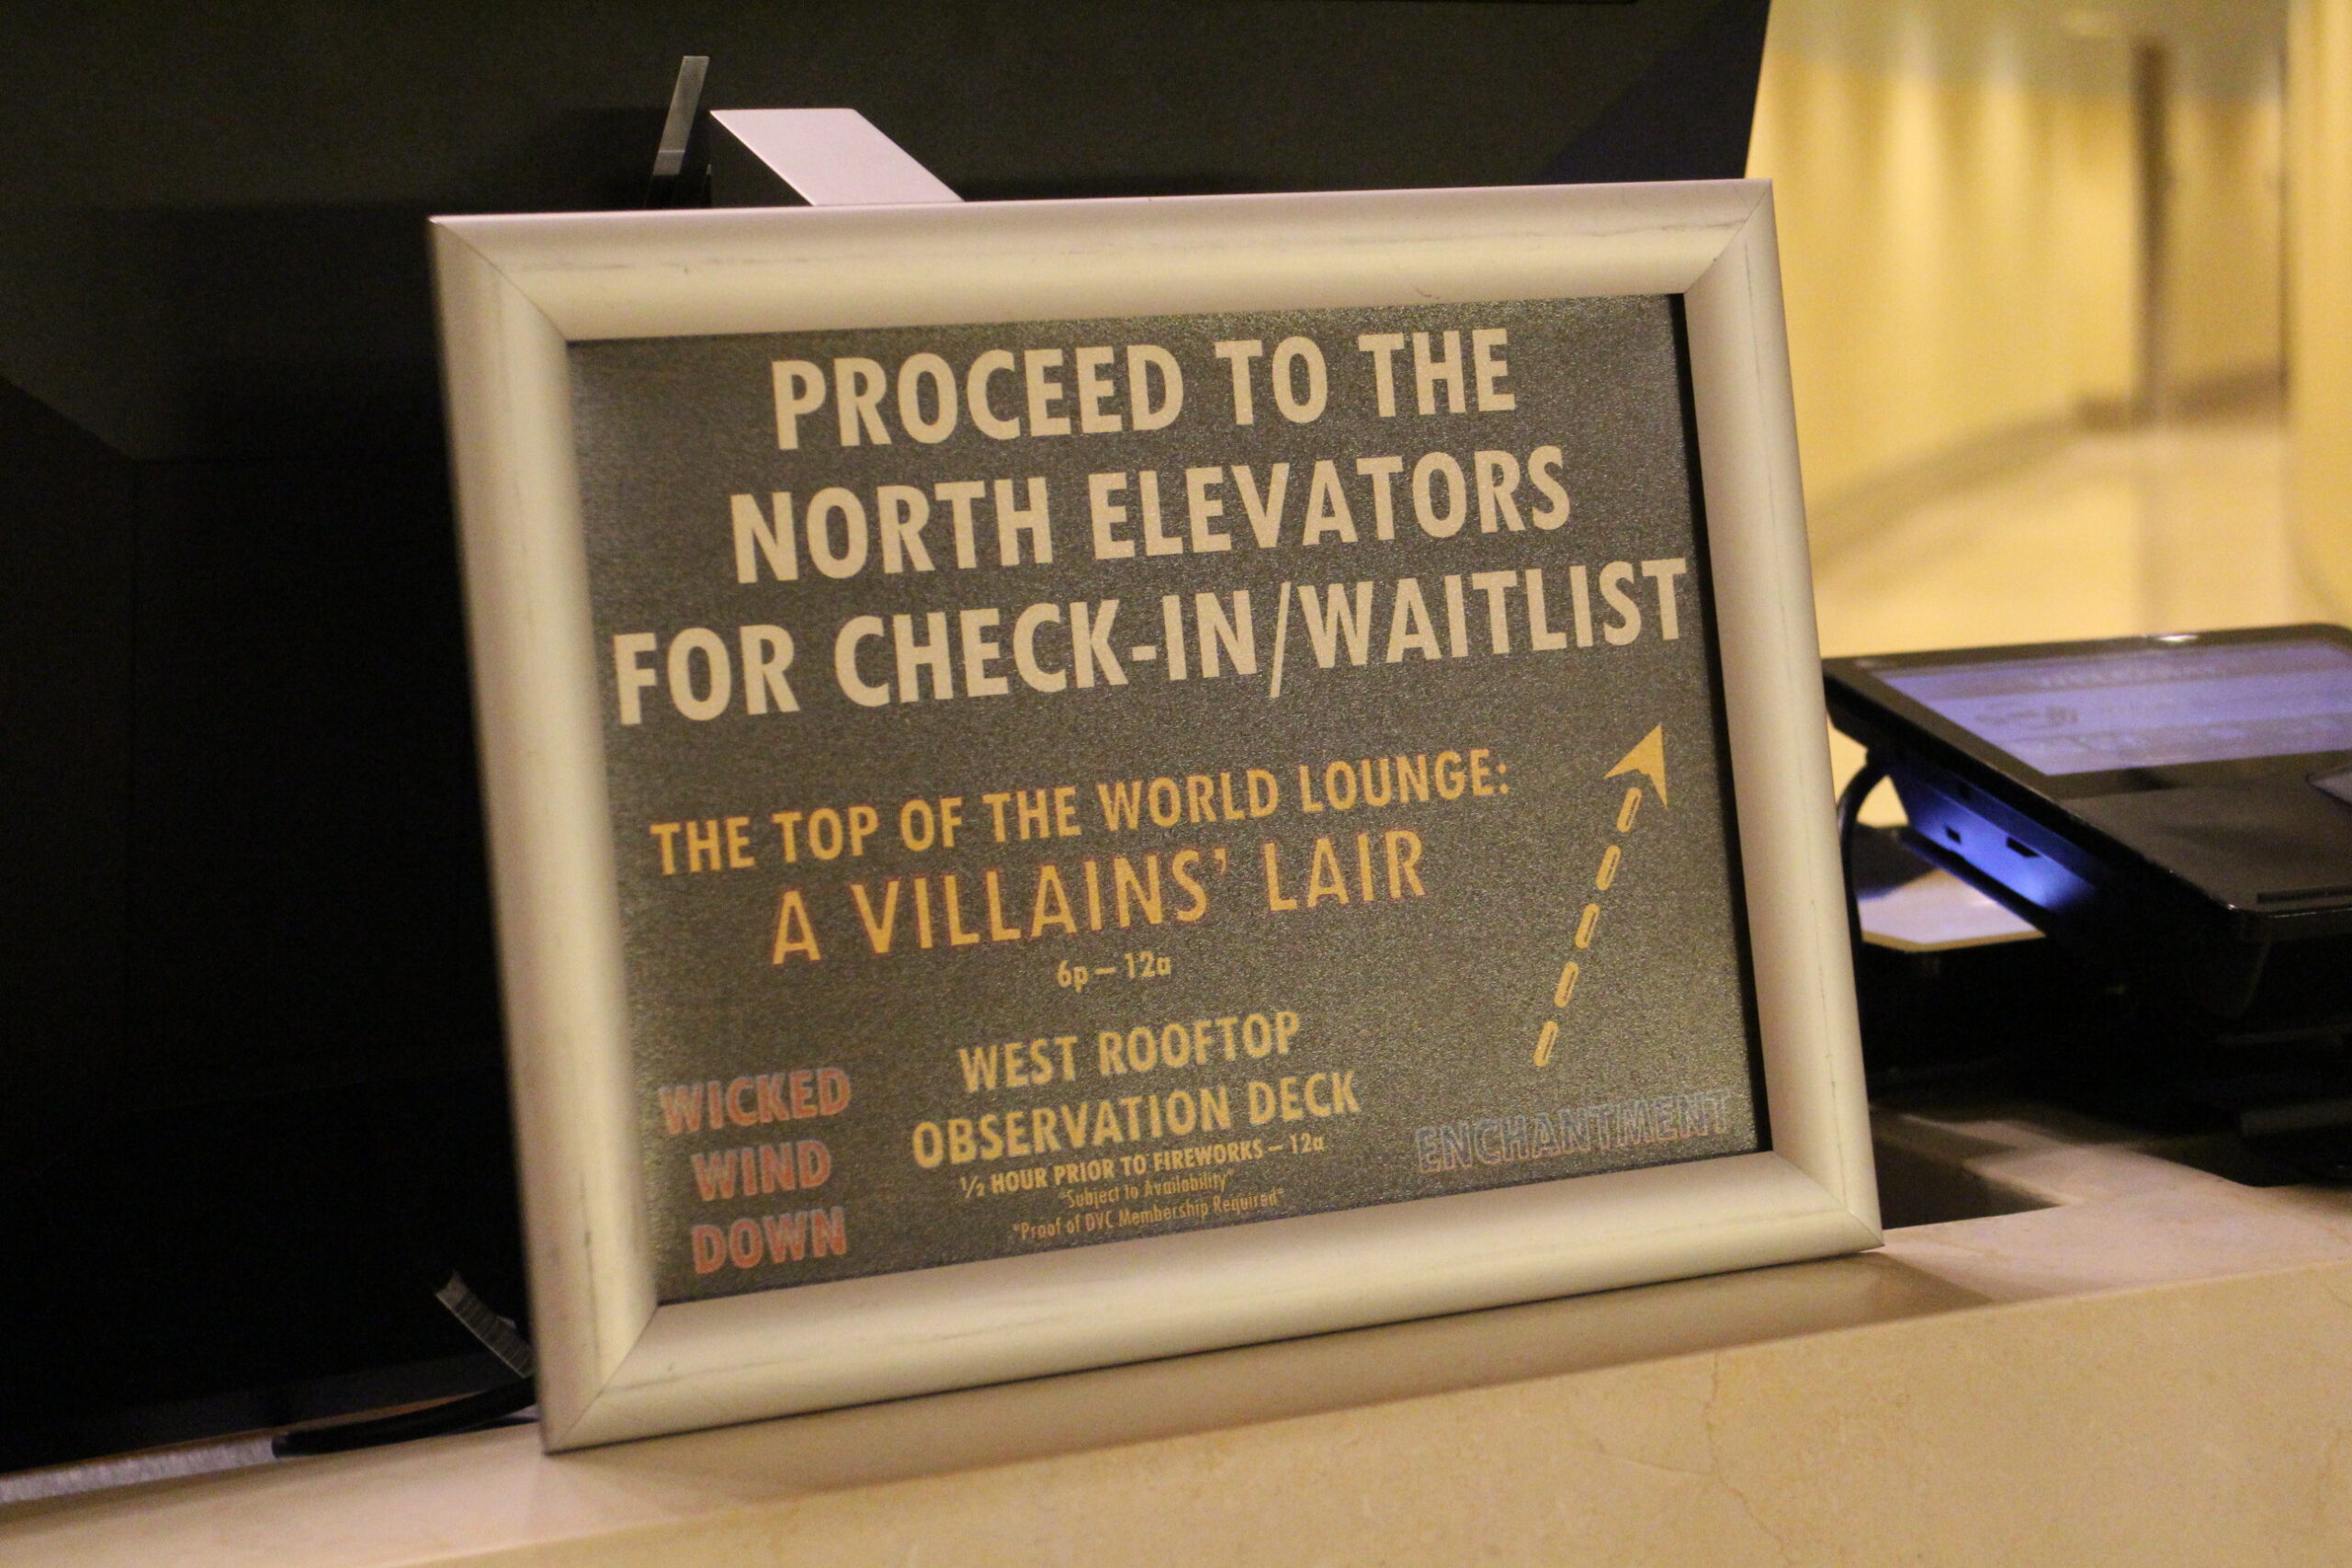 a sign on a desk that says proceed to the North elevators for check in/waitlist for Top of the World Lounge DVC